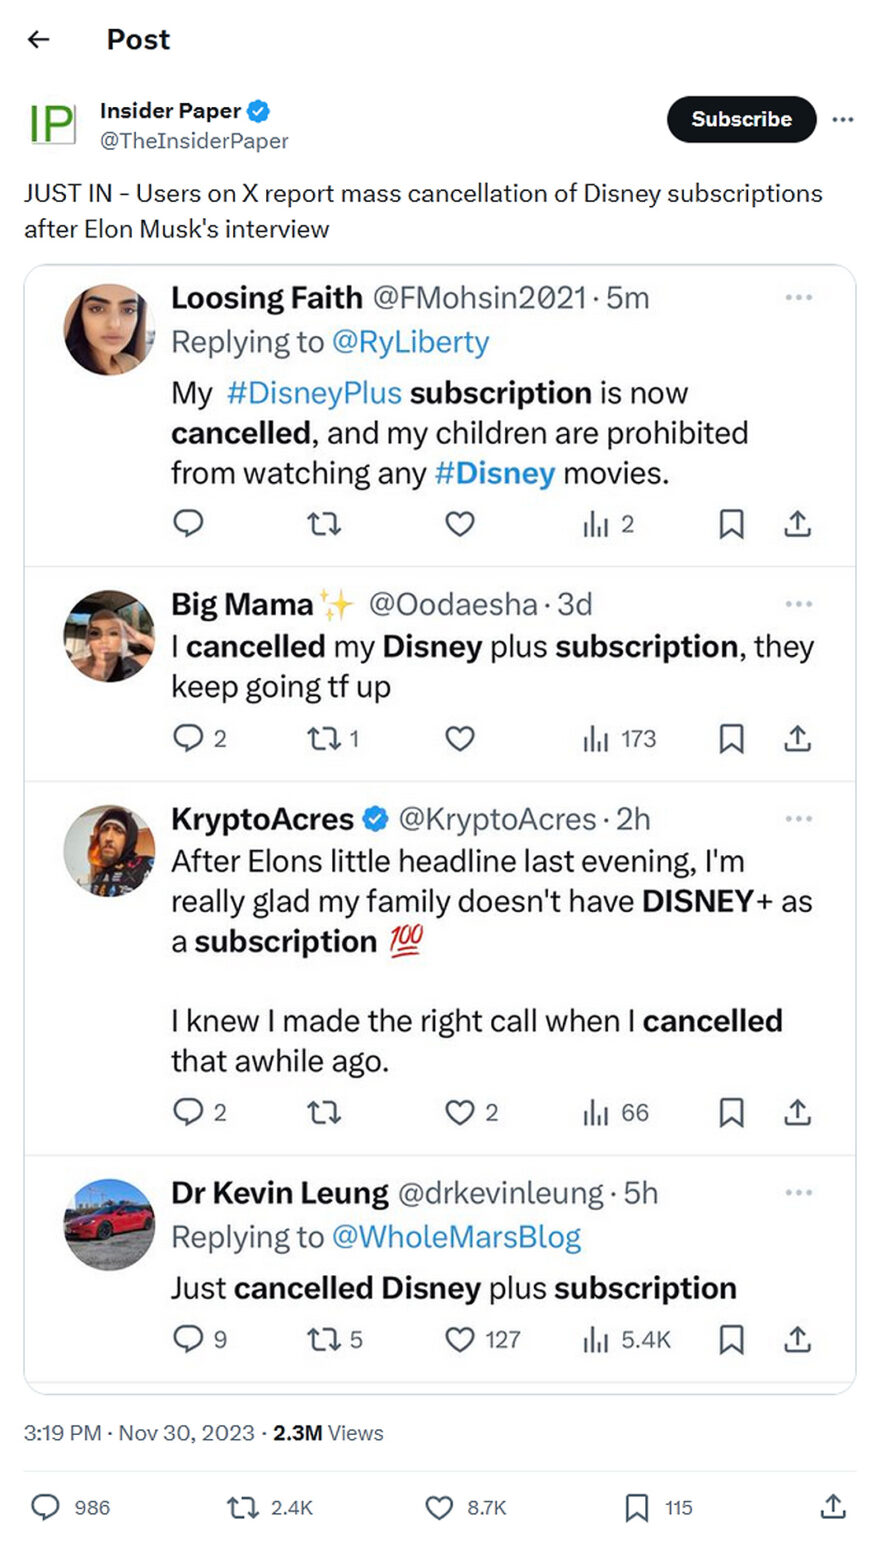 Insider Paper-tweet-30November2023-Users on X-mass cancellation of Disney subscriptions